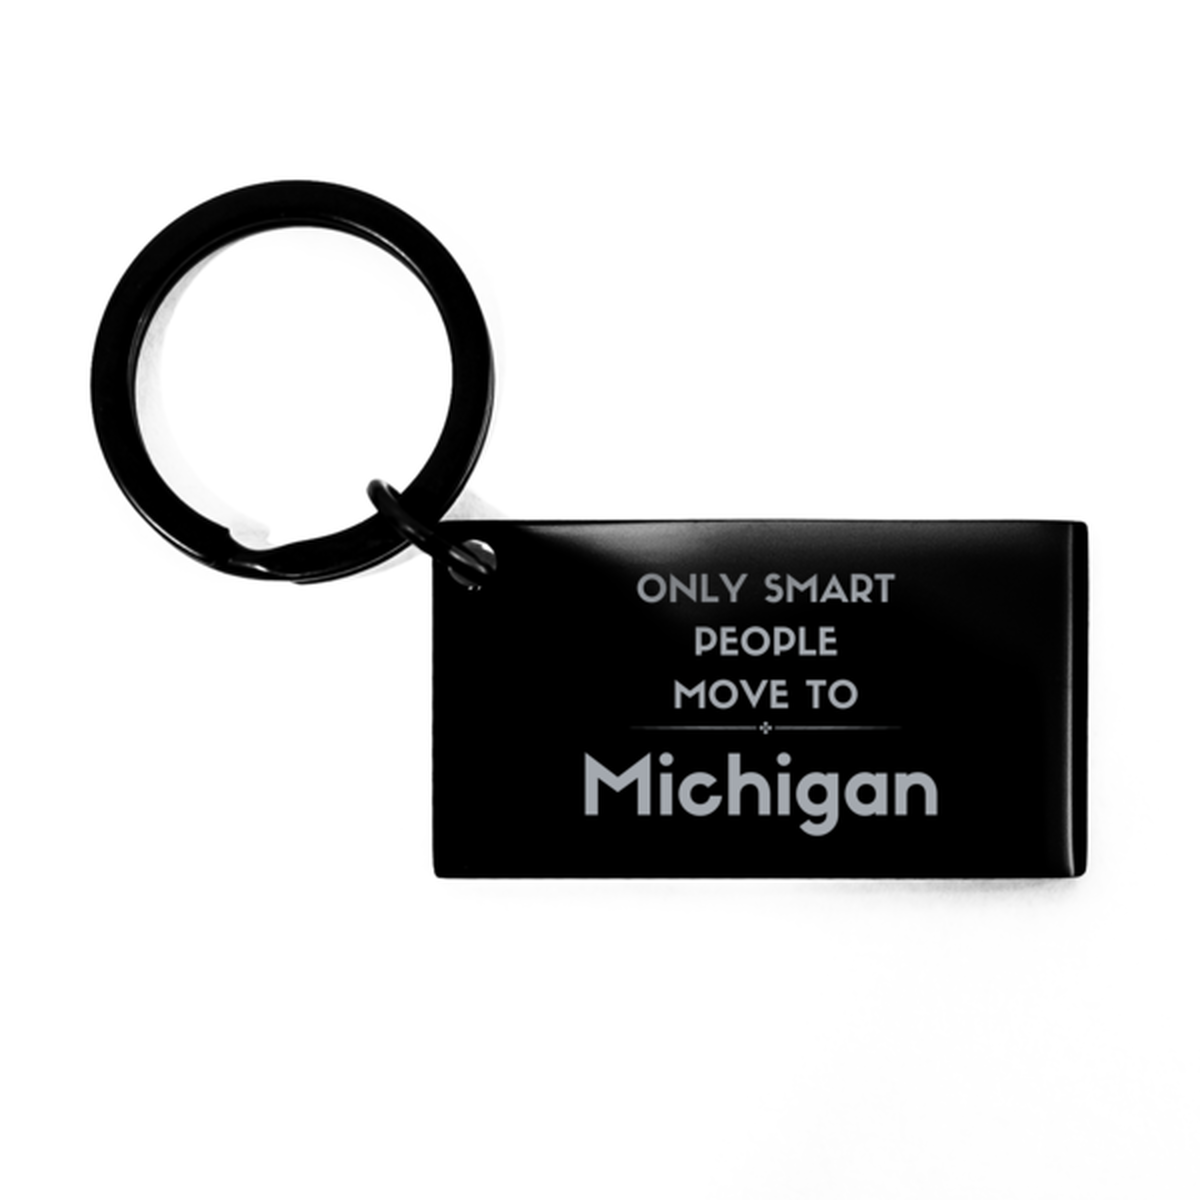 Only smart people move to Michigan Keychain, Gag Gifts For Michigan, Move to Michigan Gifts for Friends Coworker Funny Saying Quote